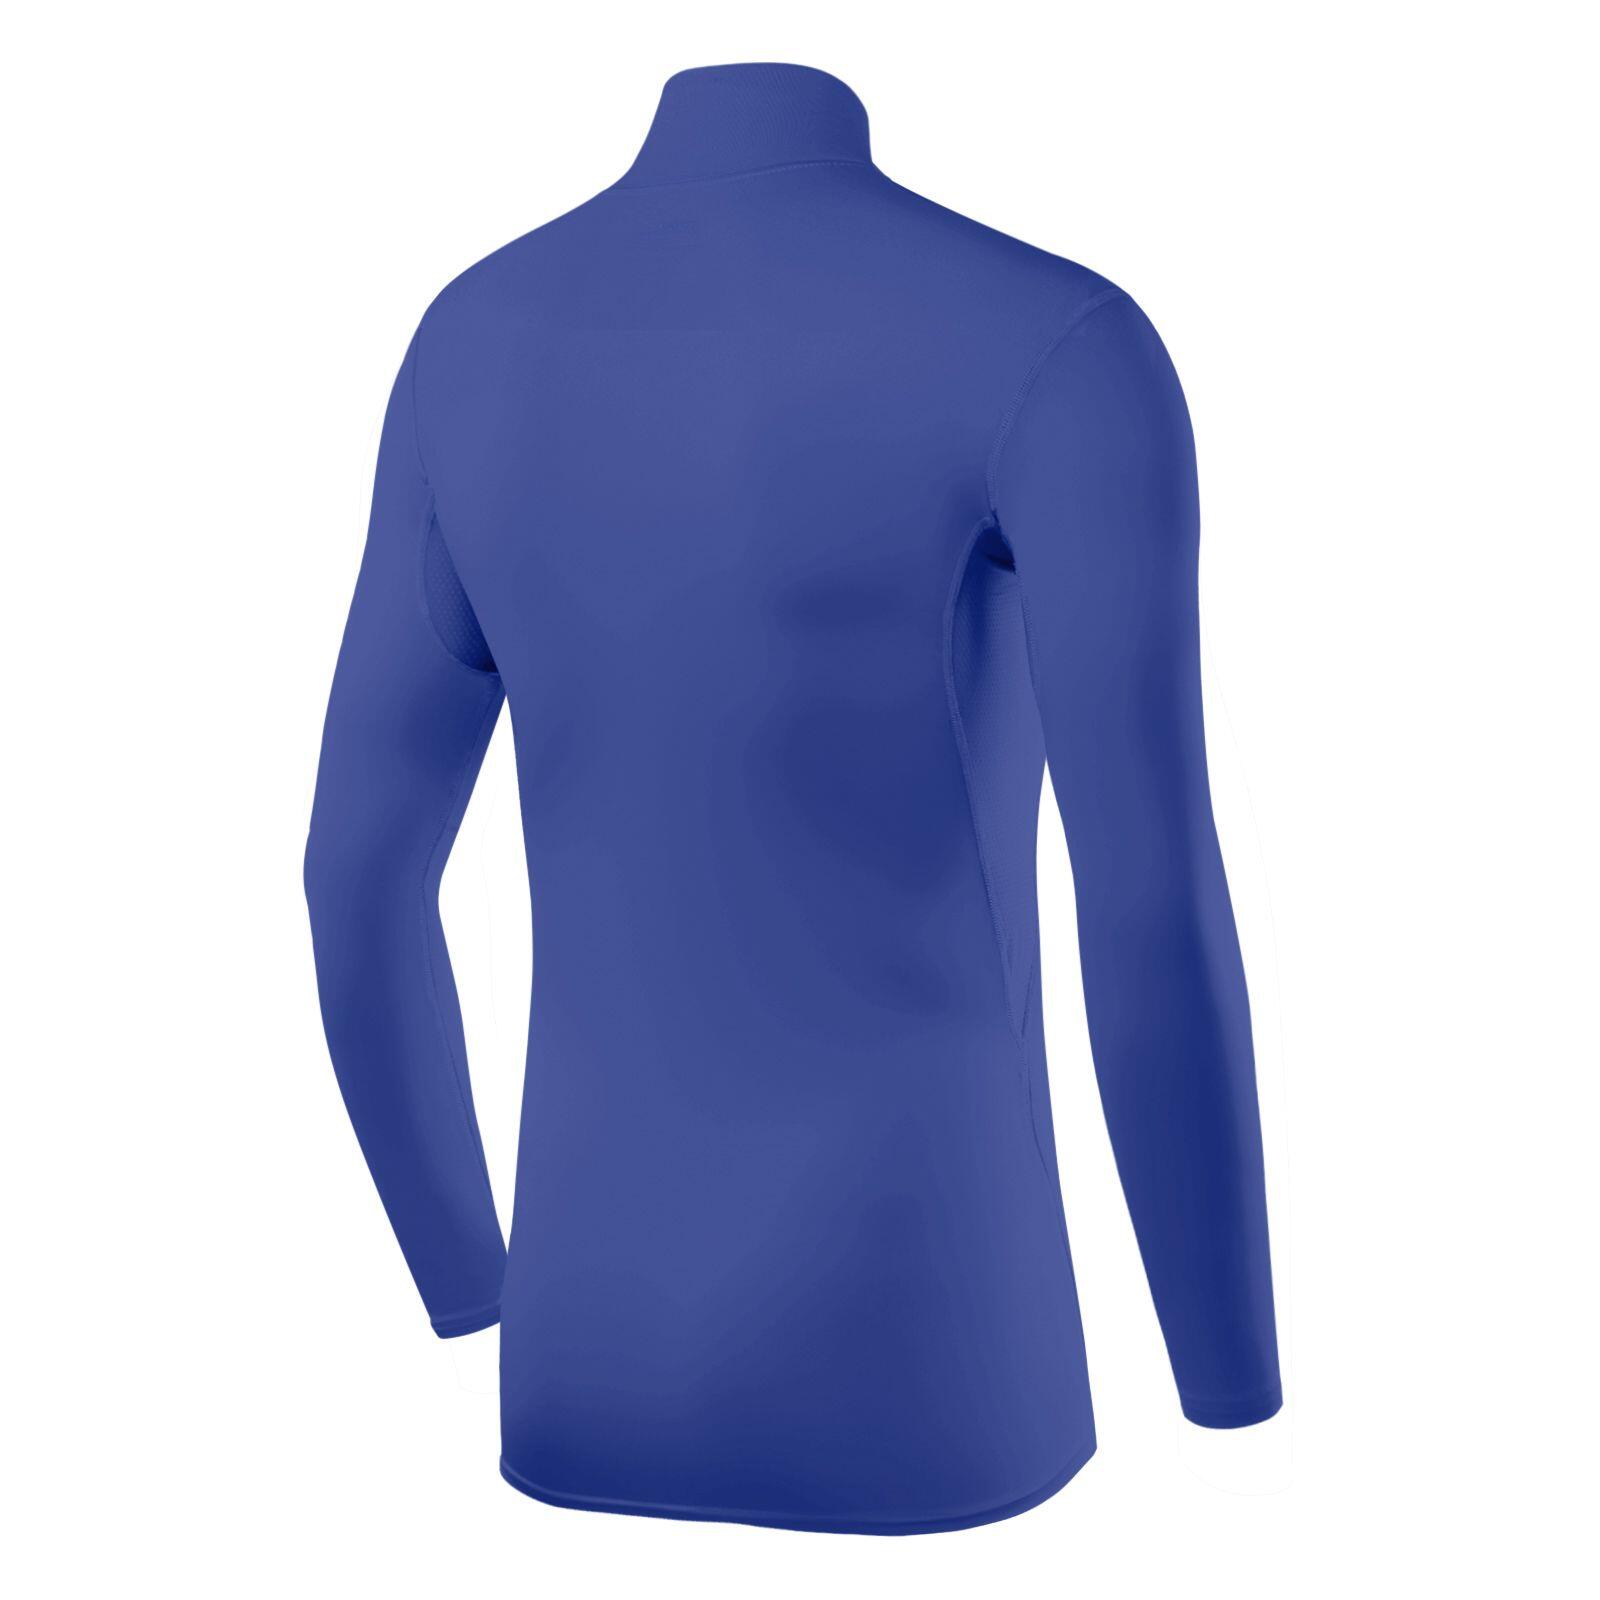 Boys' HyperFusion Breathable Base Layer Compression Top -Mock - Dazzling Blue 3/5